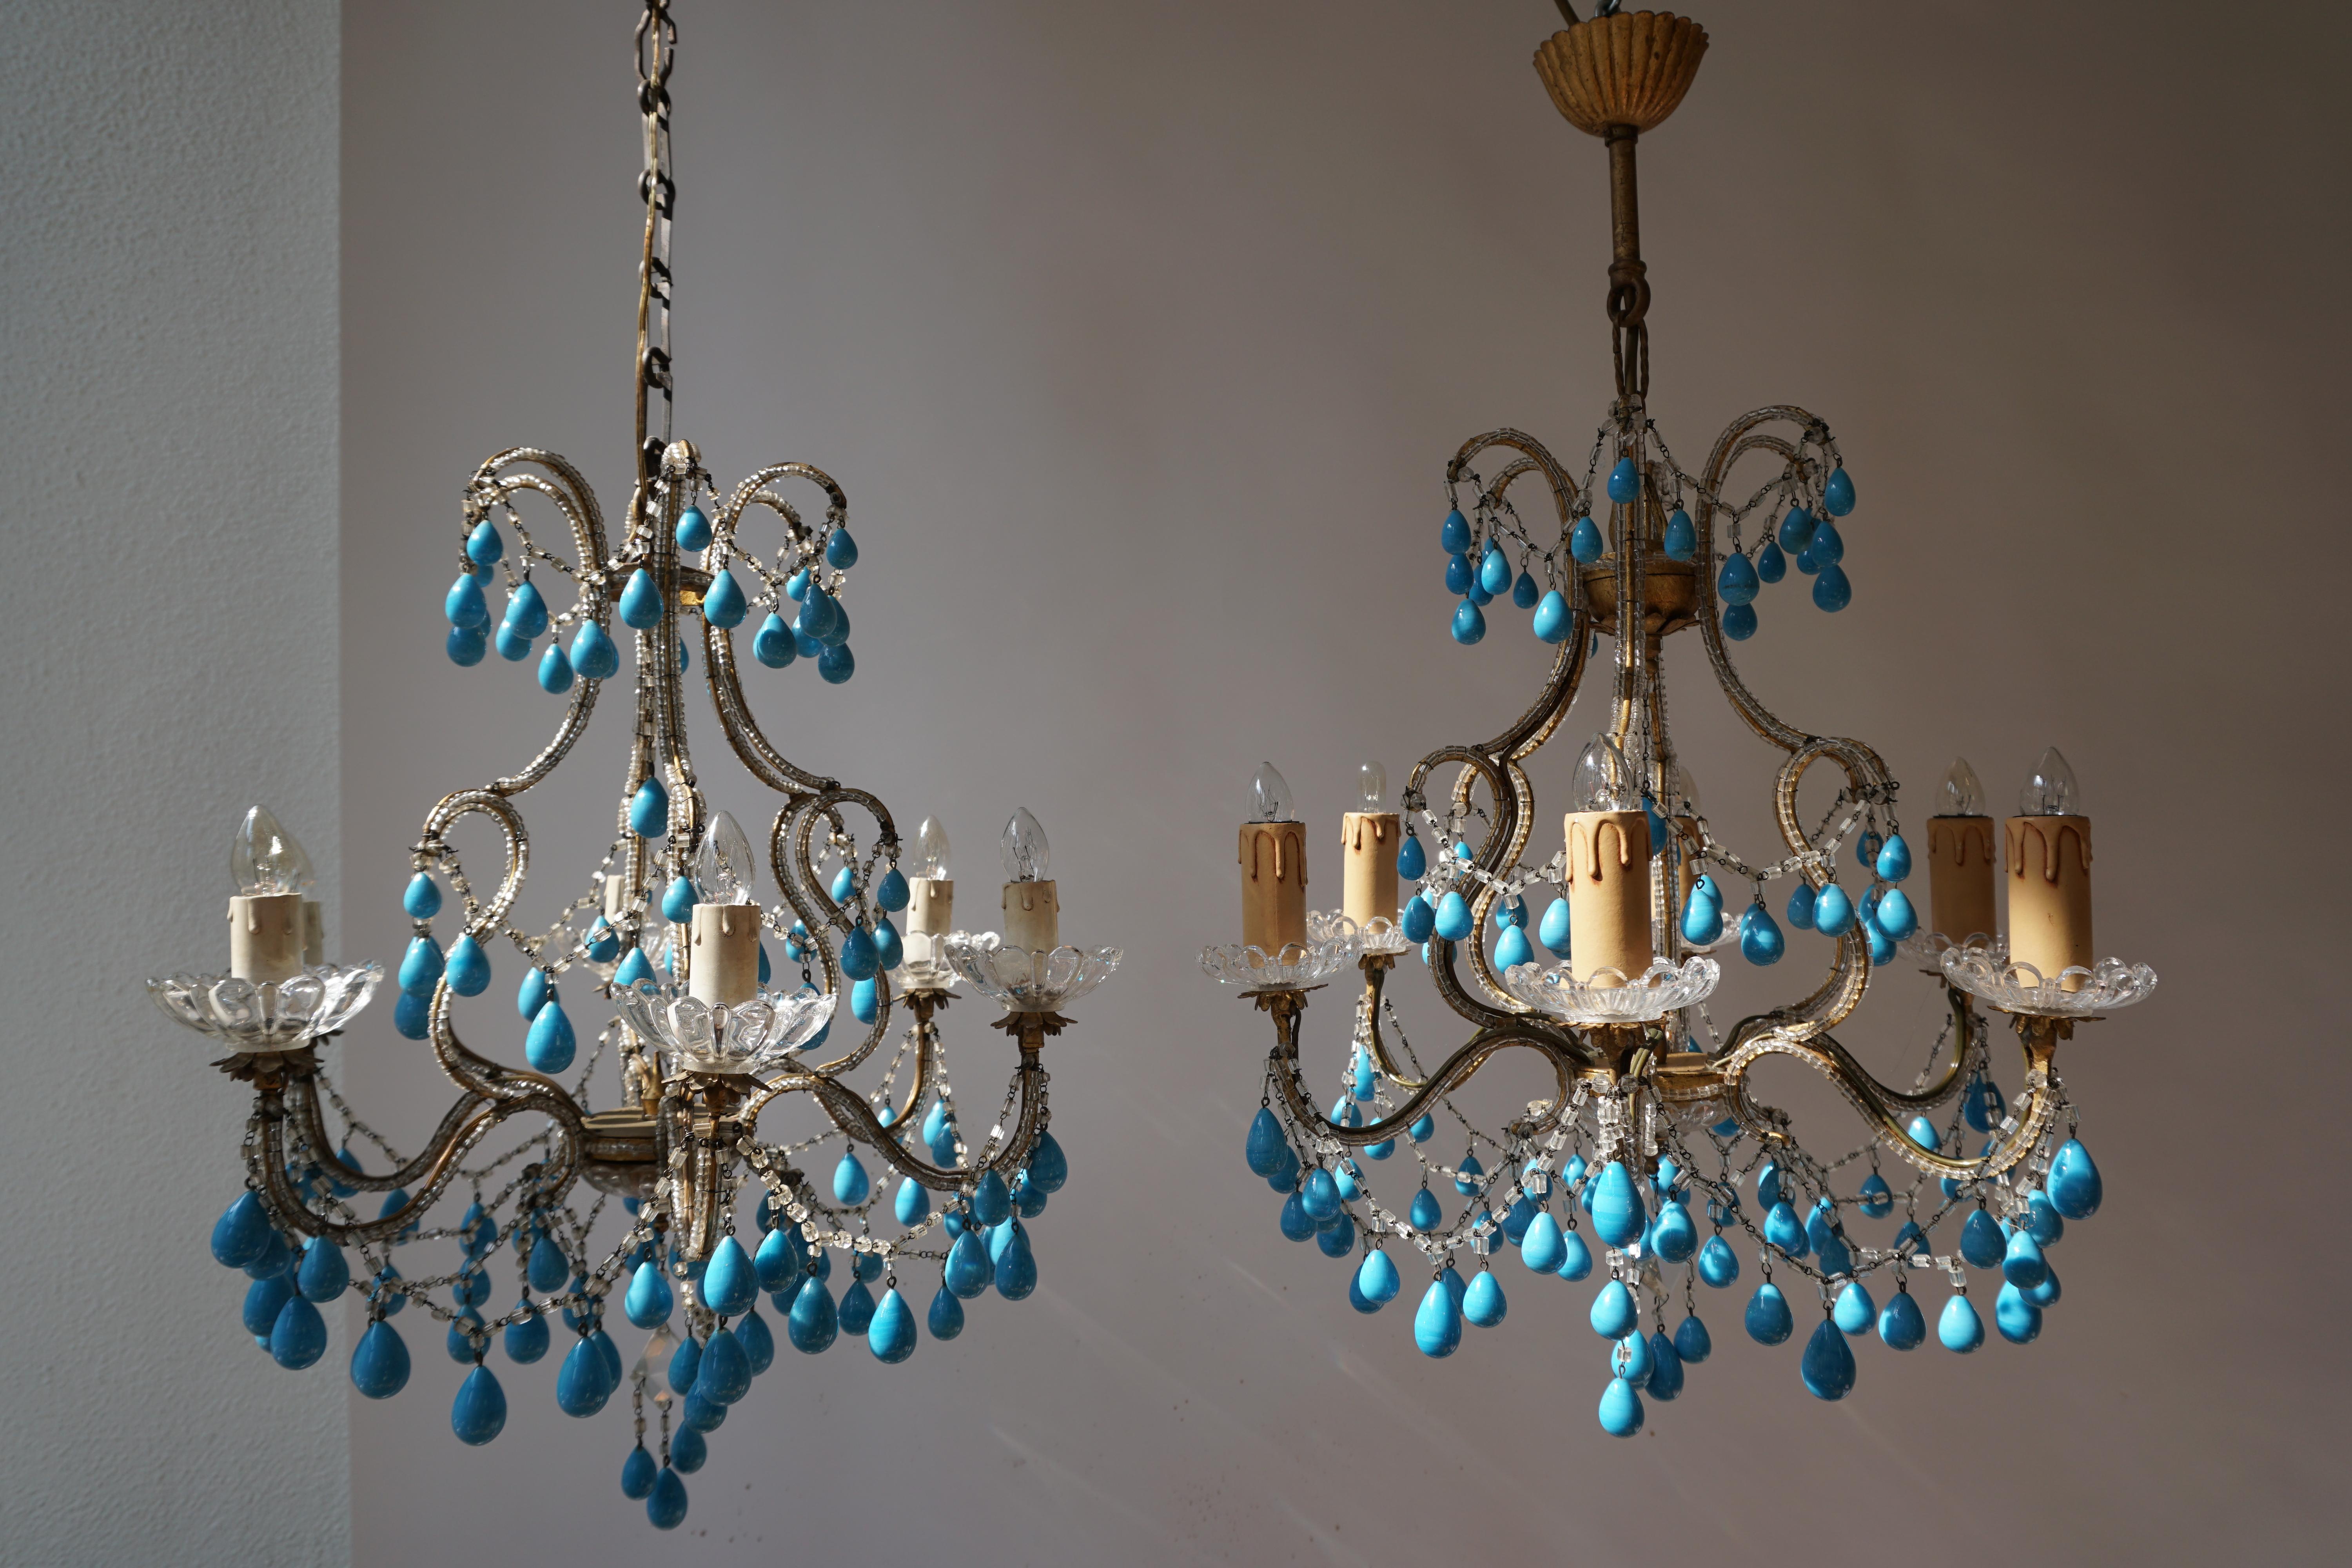 Pair of Elegant Italian Chandeliers with Turquoise Stone For Sale 1